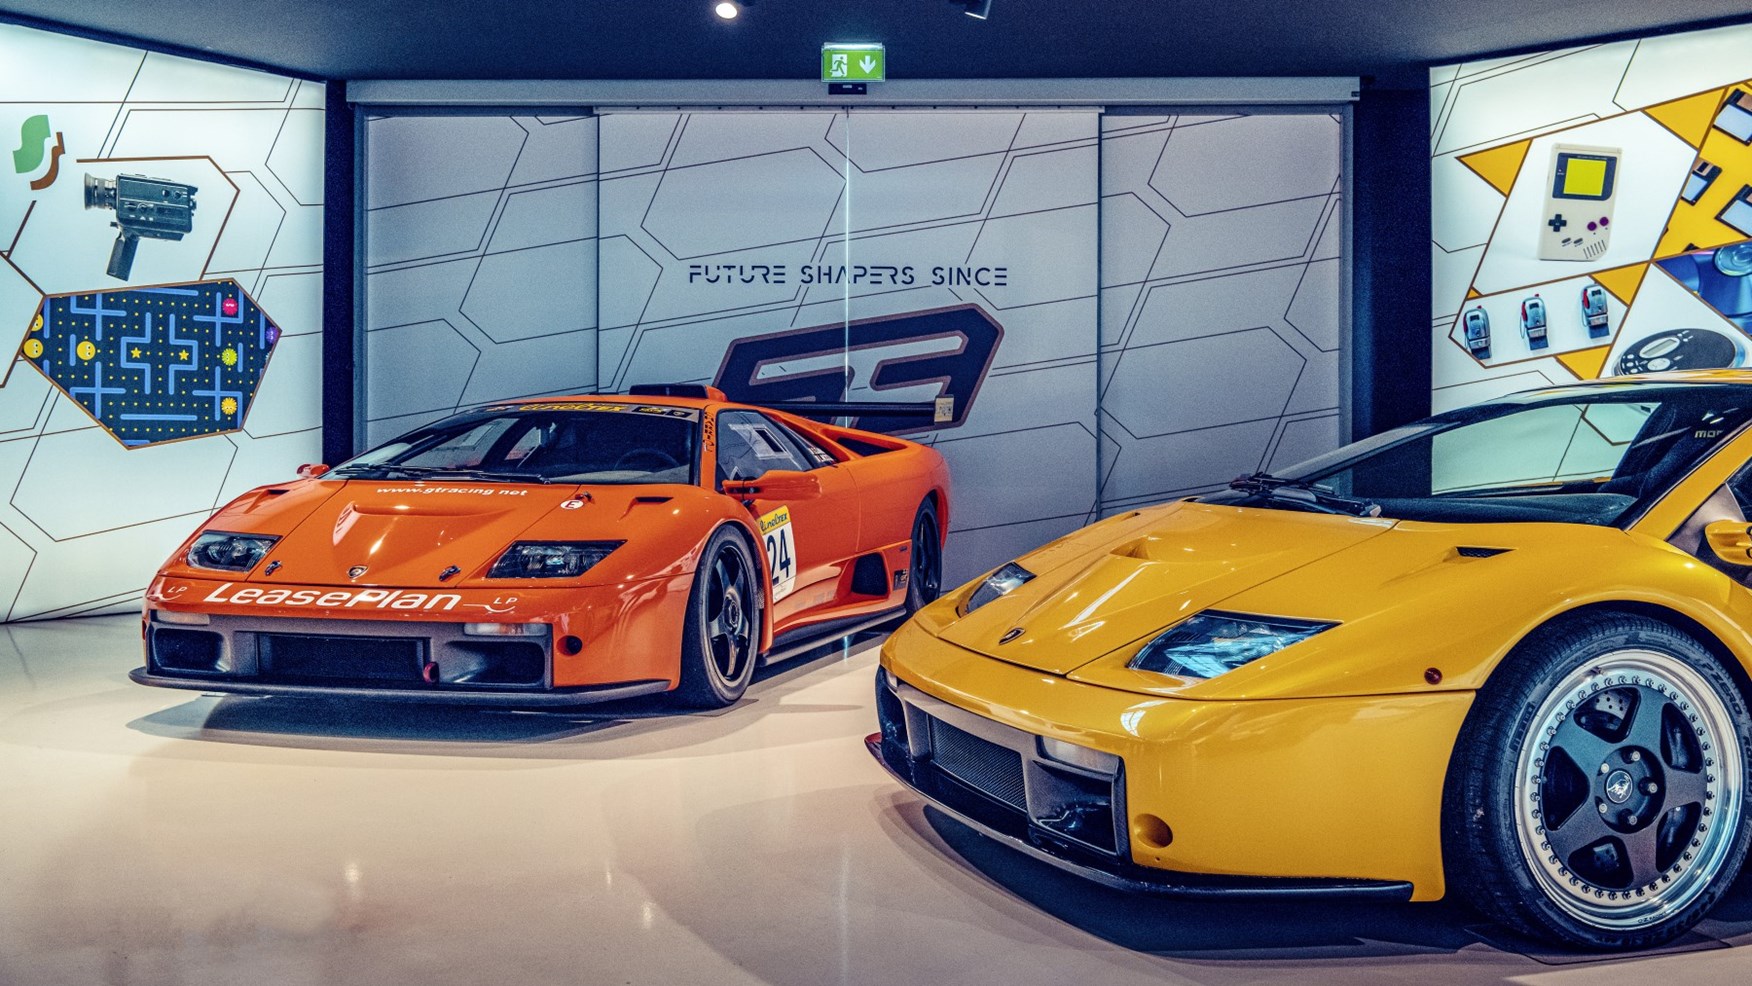 Where the wild things are: Inside Lambo HQ